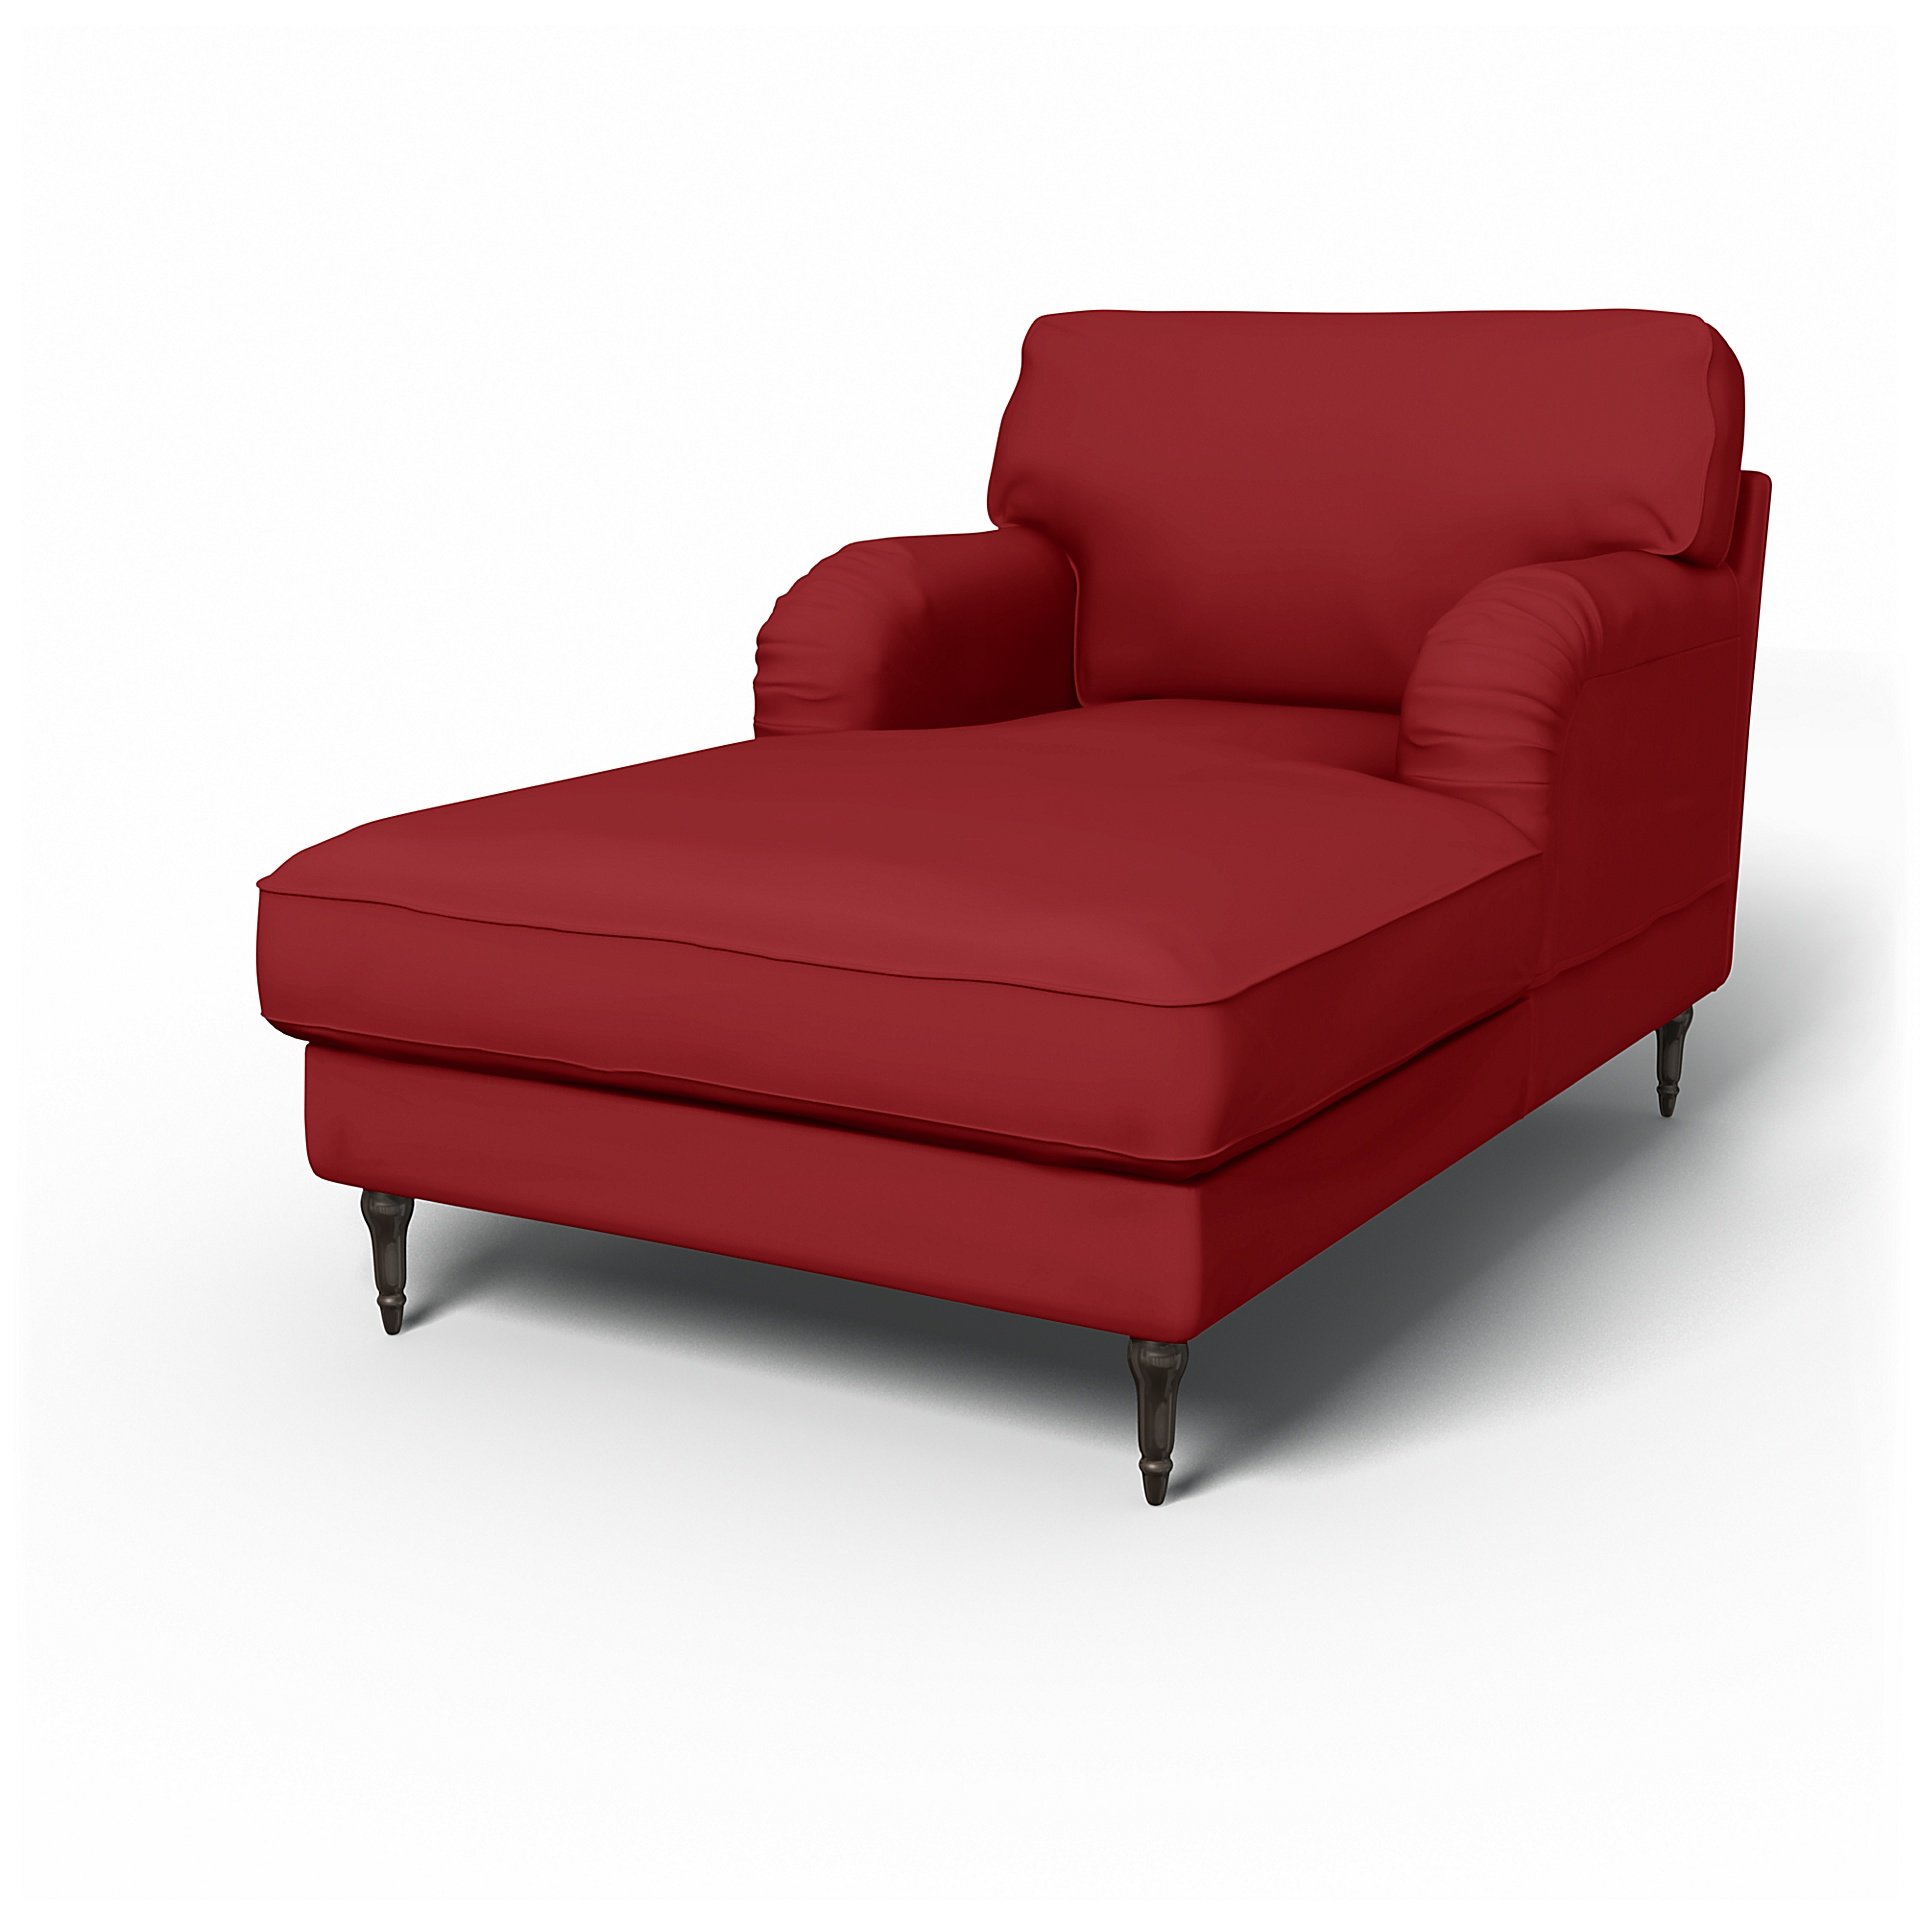 IKEA - Stocksund Chaise Longue Cover, Scarlet Red, Cotton - Bemz